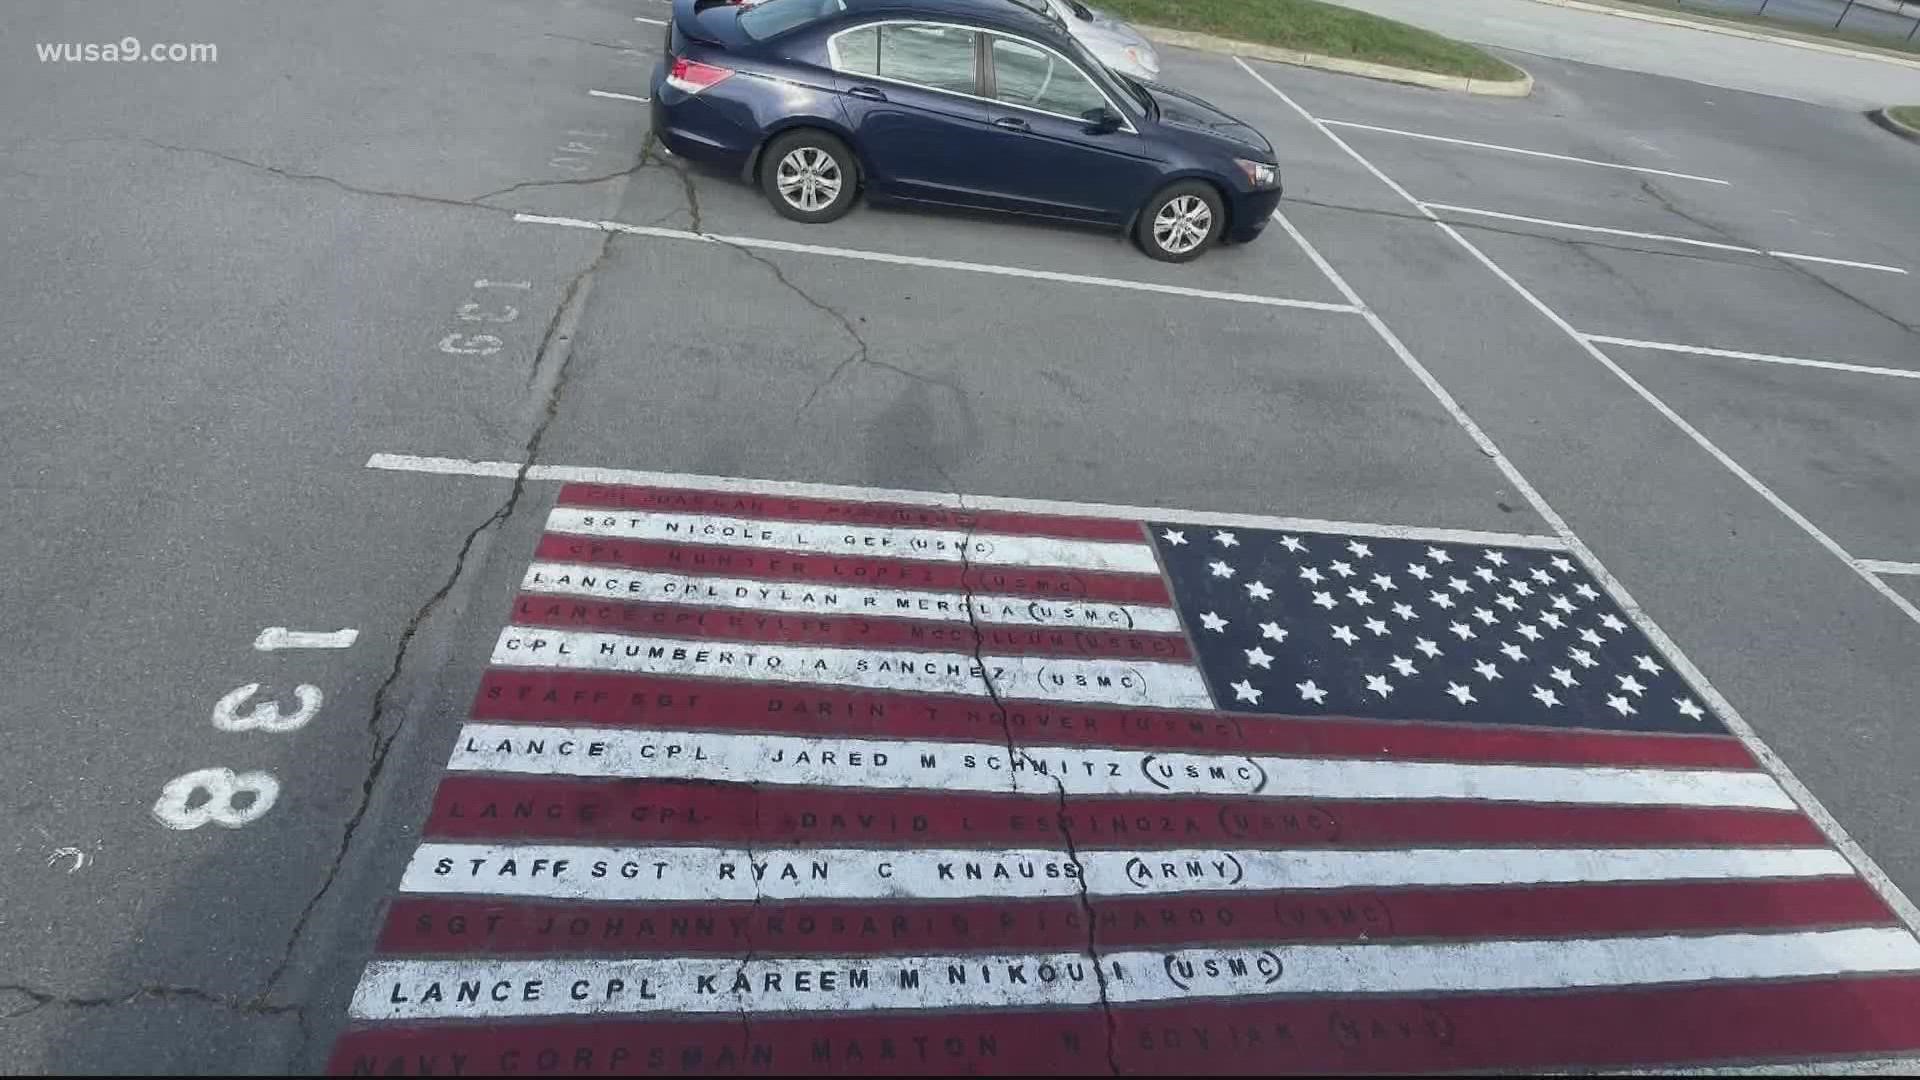 Kat Kibler chose to use her parking space to honor 13 U.S. soldiers killed in Afghanistan.